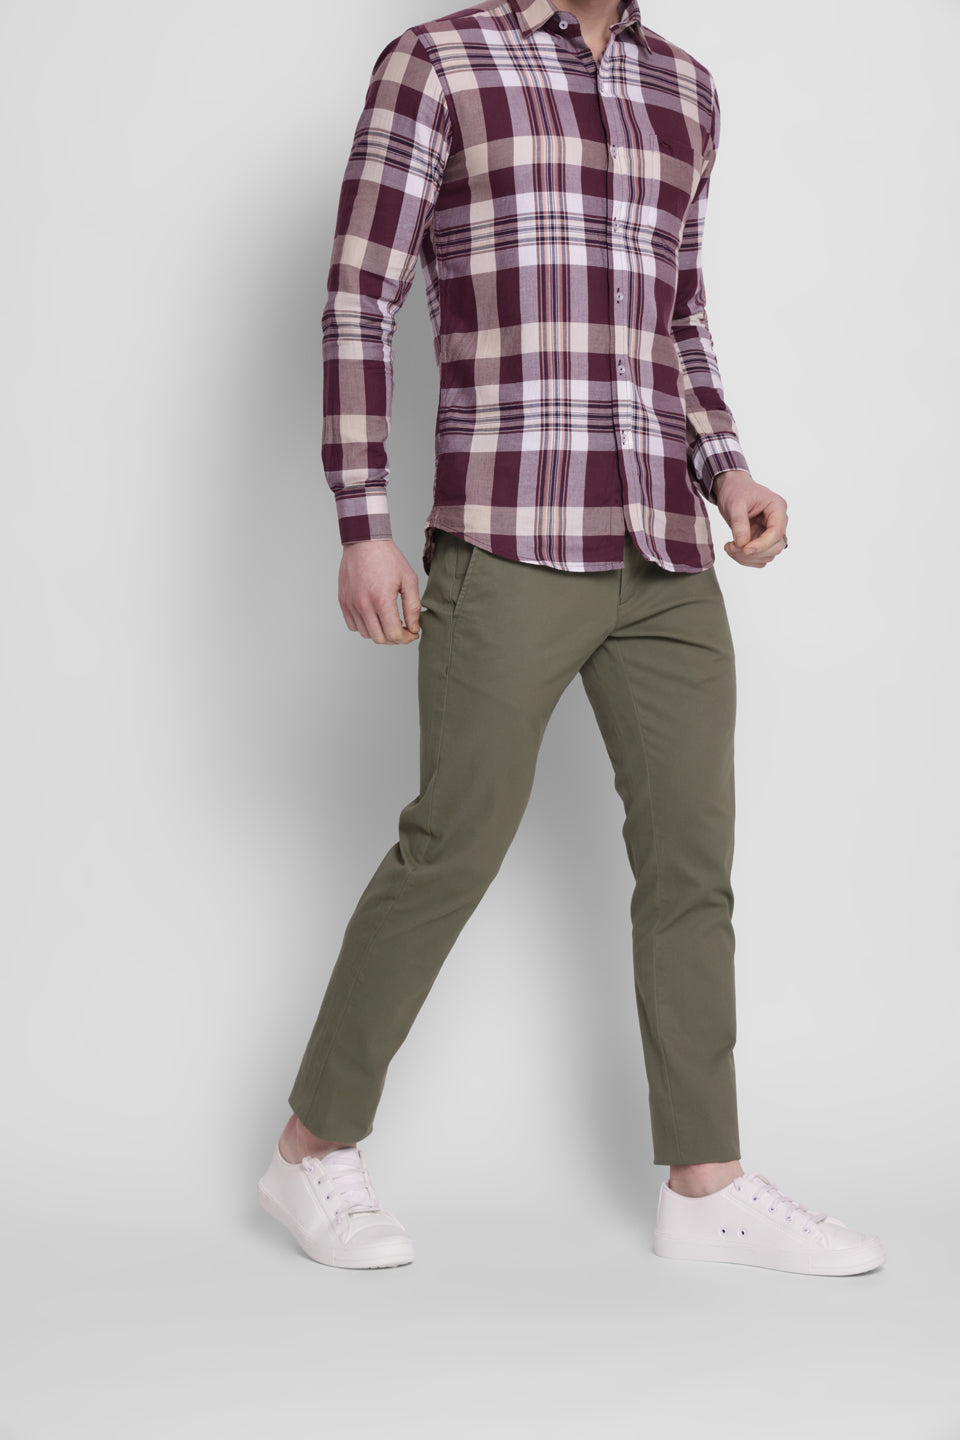 Durable Men's Clothing, Denim Jeans, Chinos & Tees